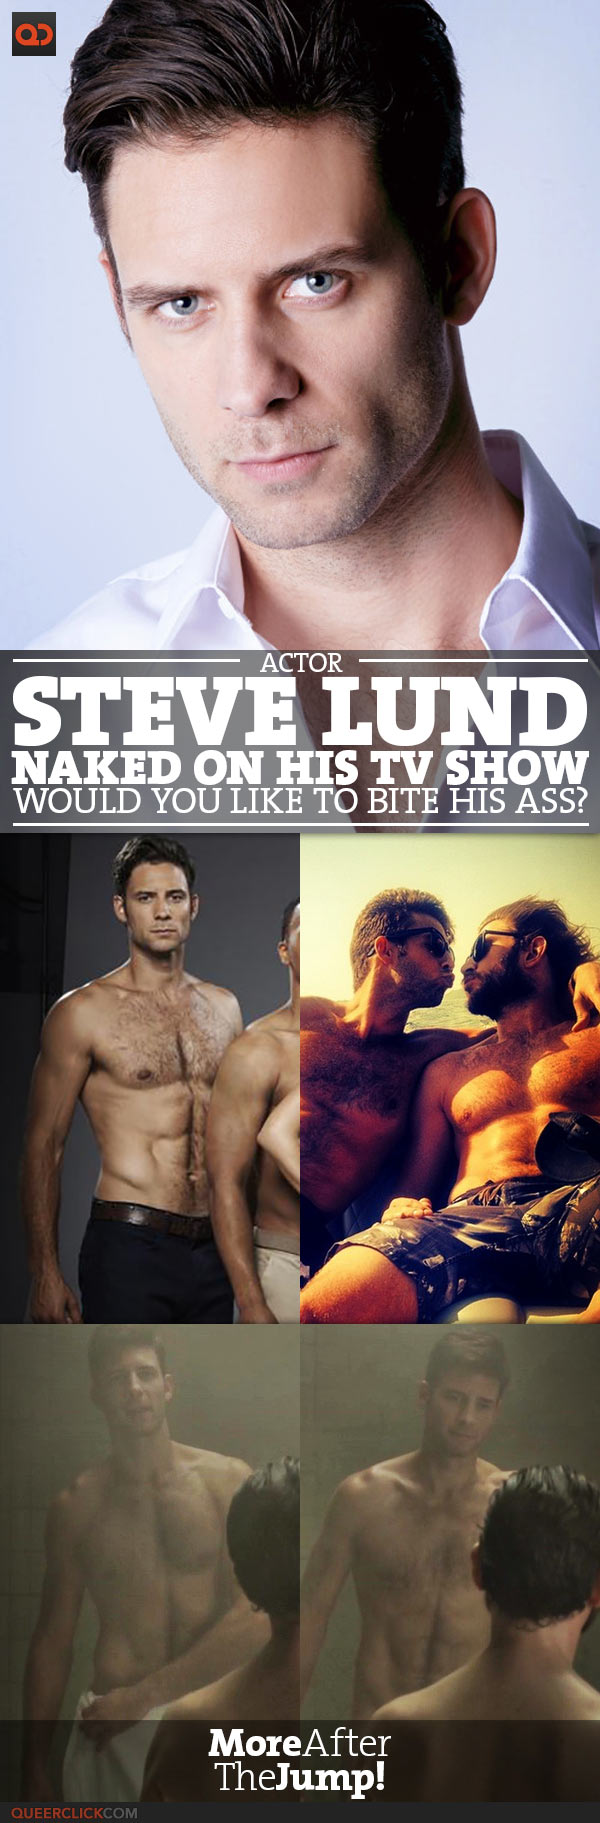 Actor Steve Lund Got Naked For His Tv Show - Would You Like To Bite His Ass?